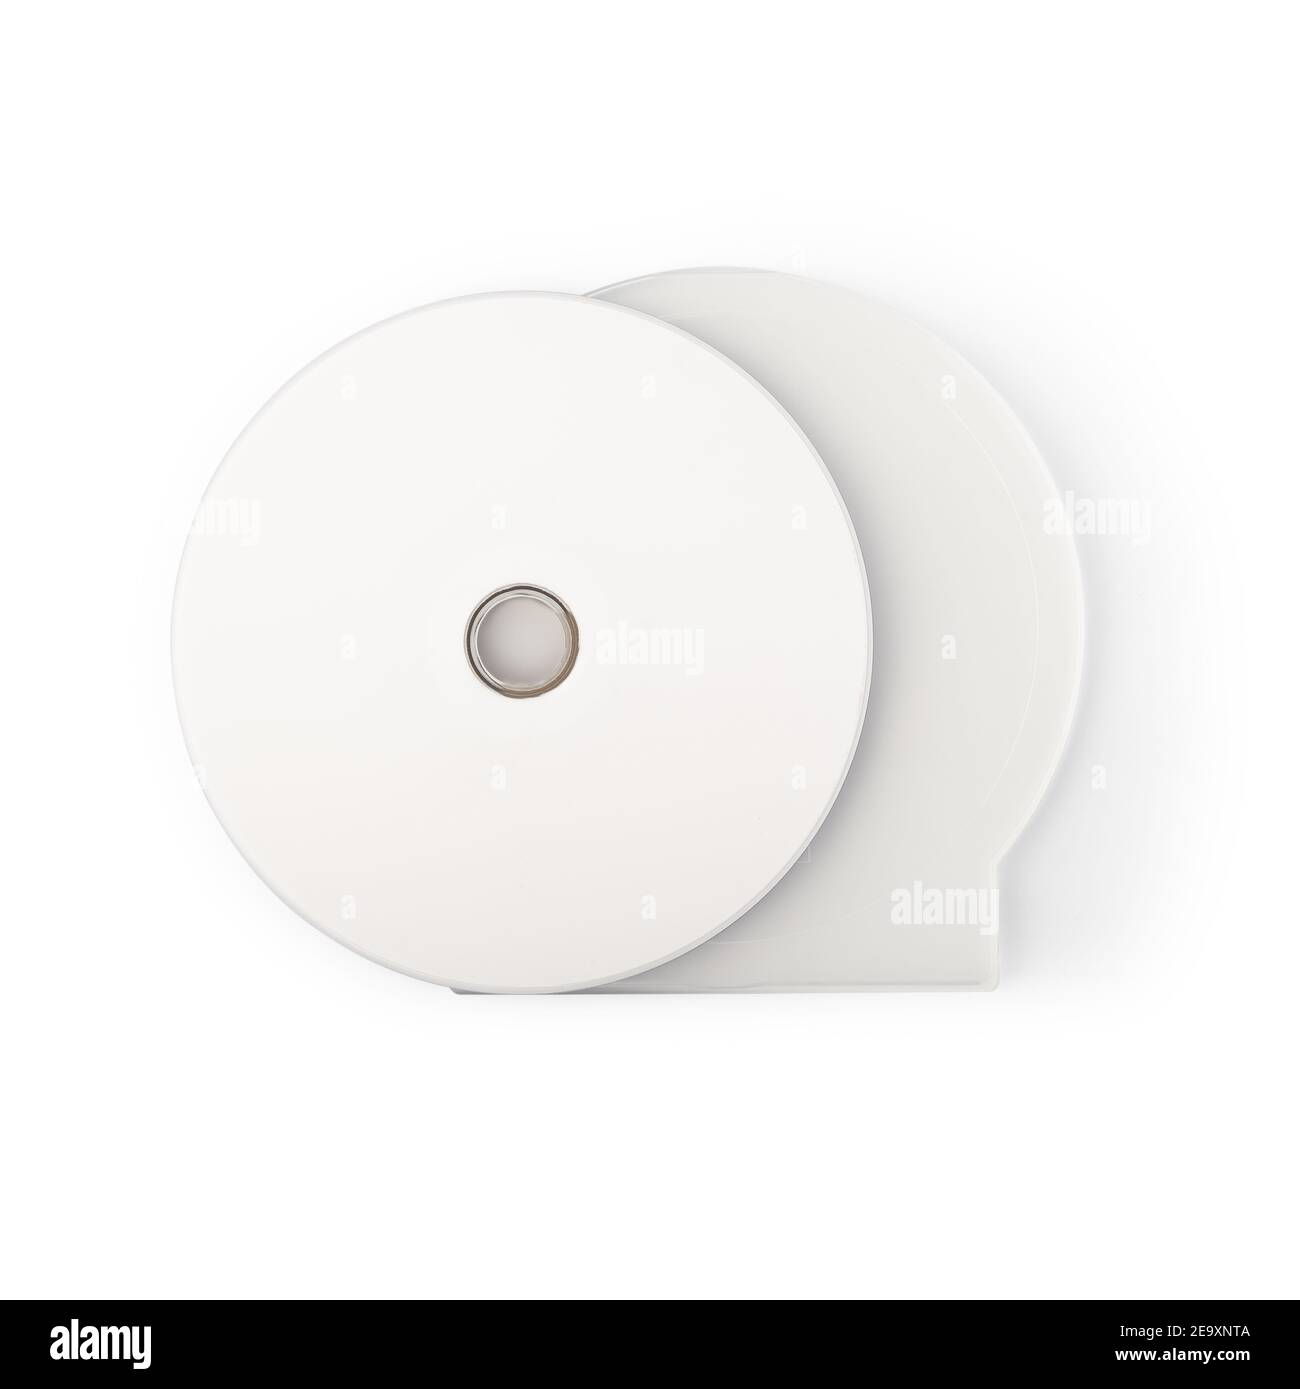 Realistic white cd with box cover template isolated on white background with clipping path. Stock Photo